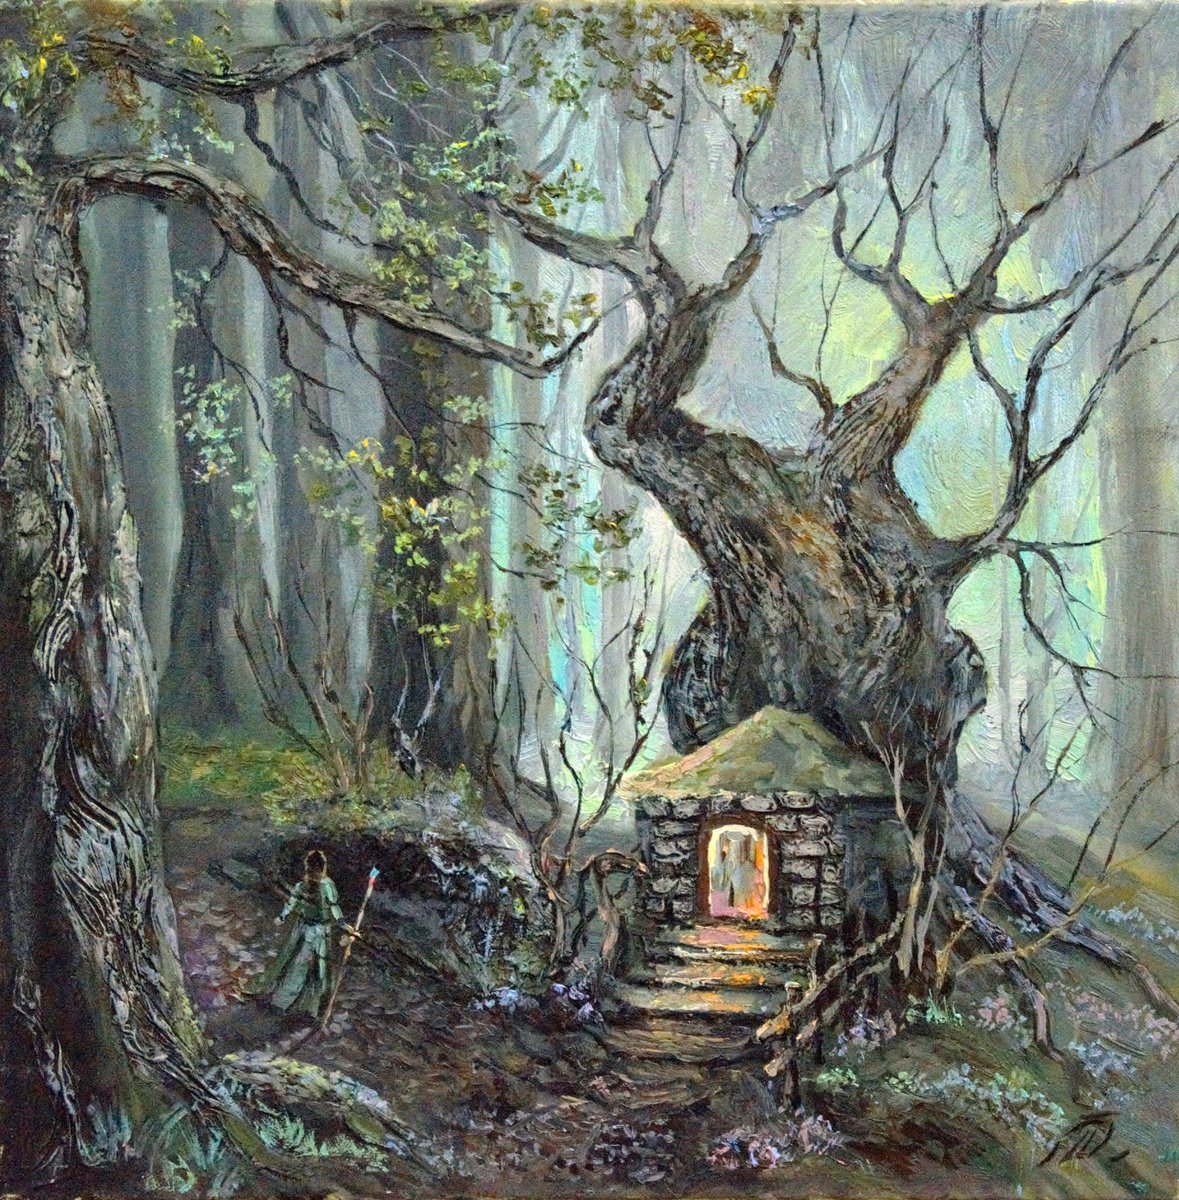 Elf house in a fantasy forest. Oil painting by Dmitry Revyakin